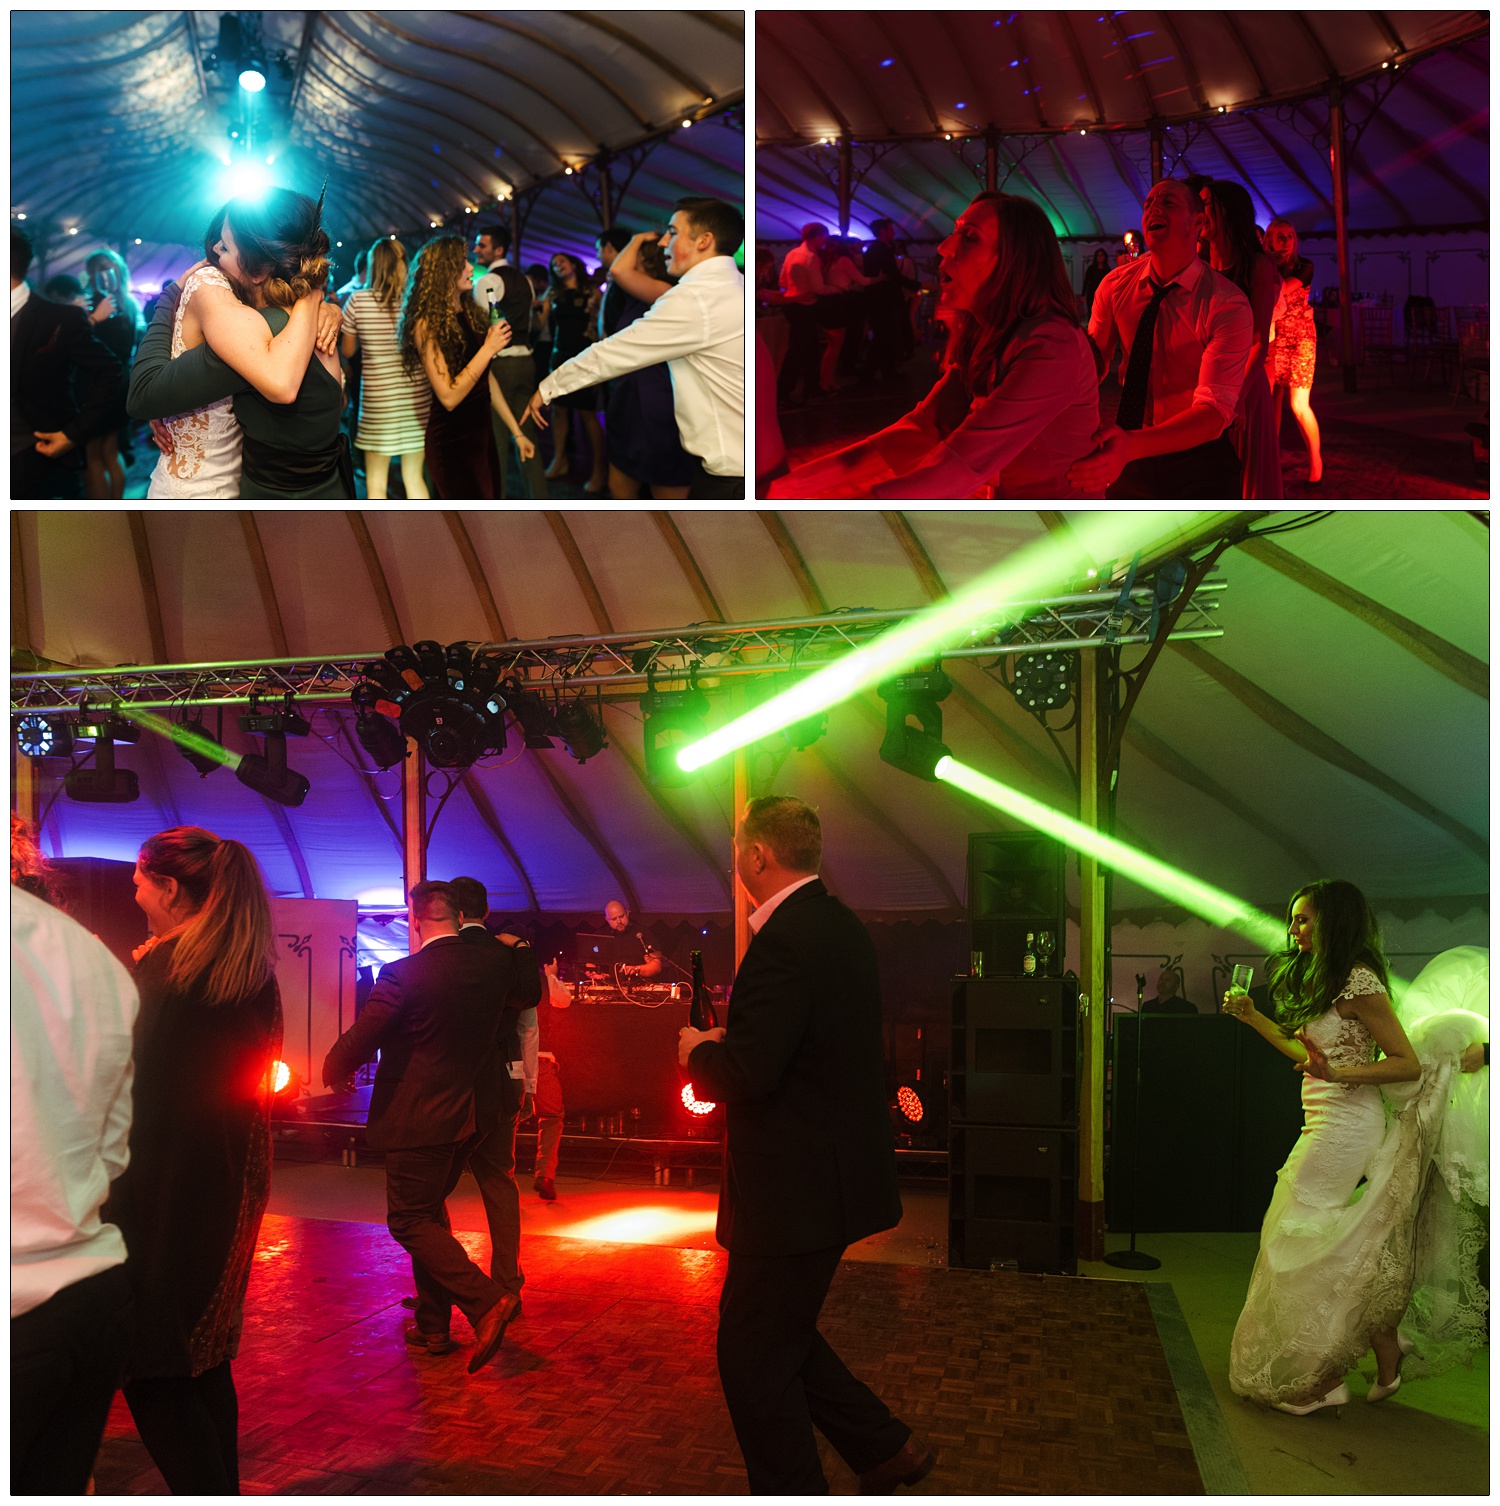 A conga of people on the dance floor, the lighting is red.